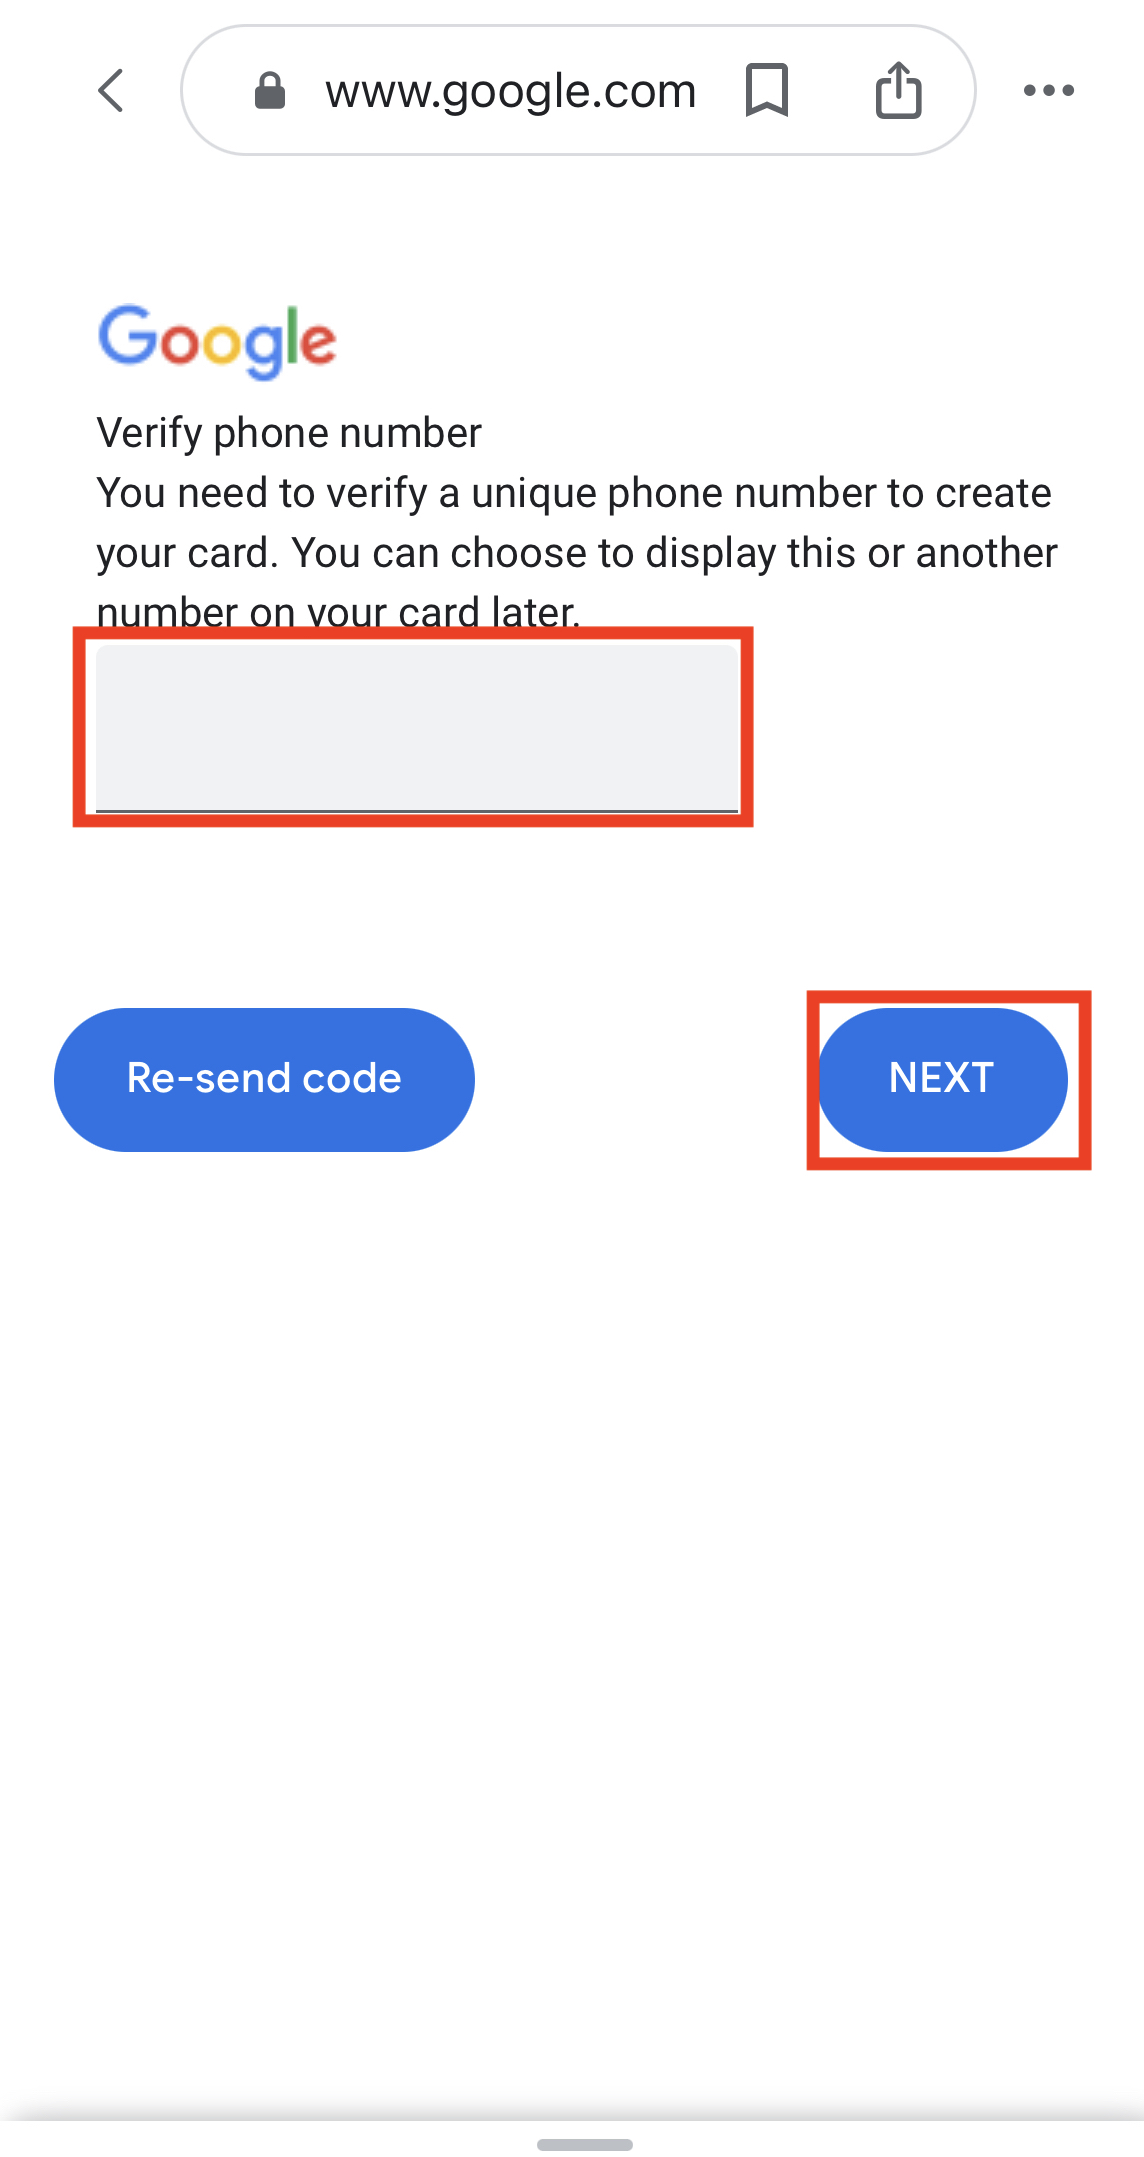 Verify phone number to create a Google people card